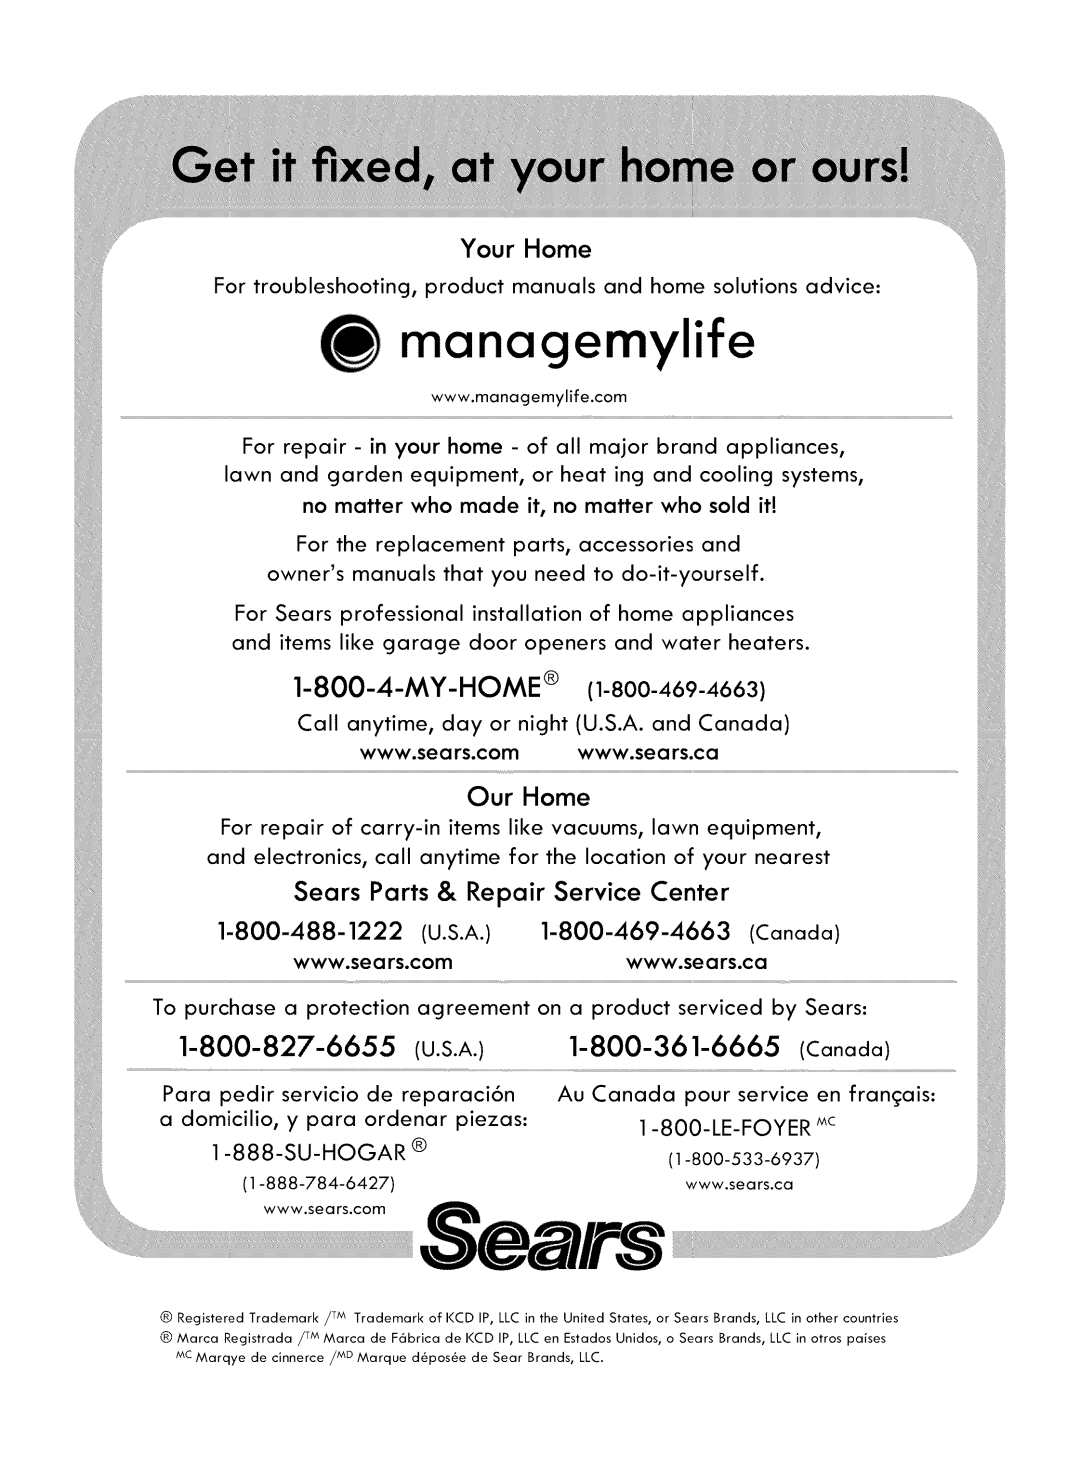 Kenmore 721. 7920 manual Our Home, Sears Parts & Repair Service Center, Your Home, managemylife 